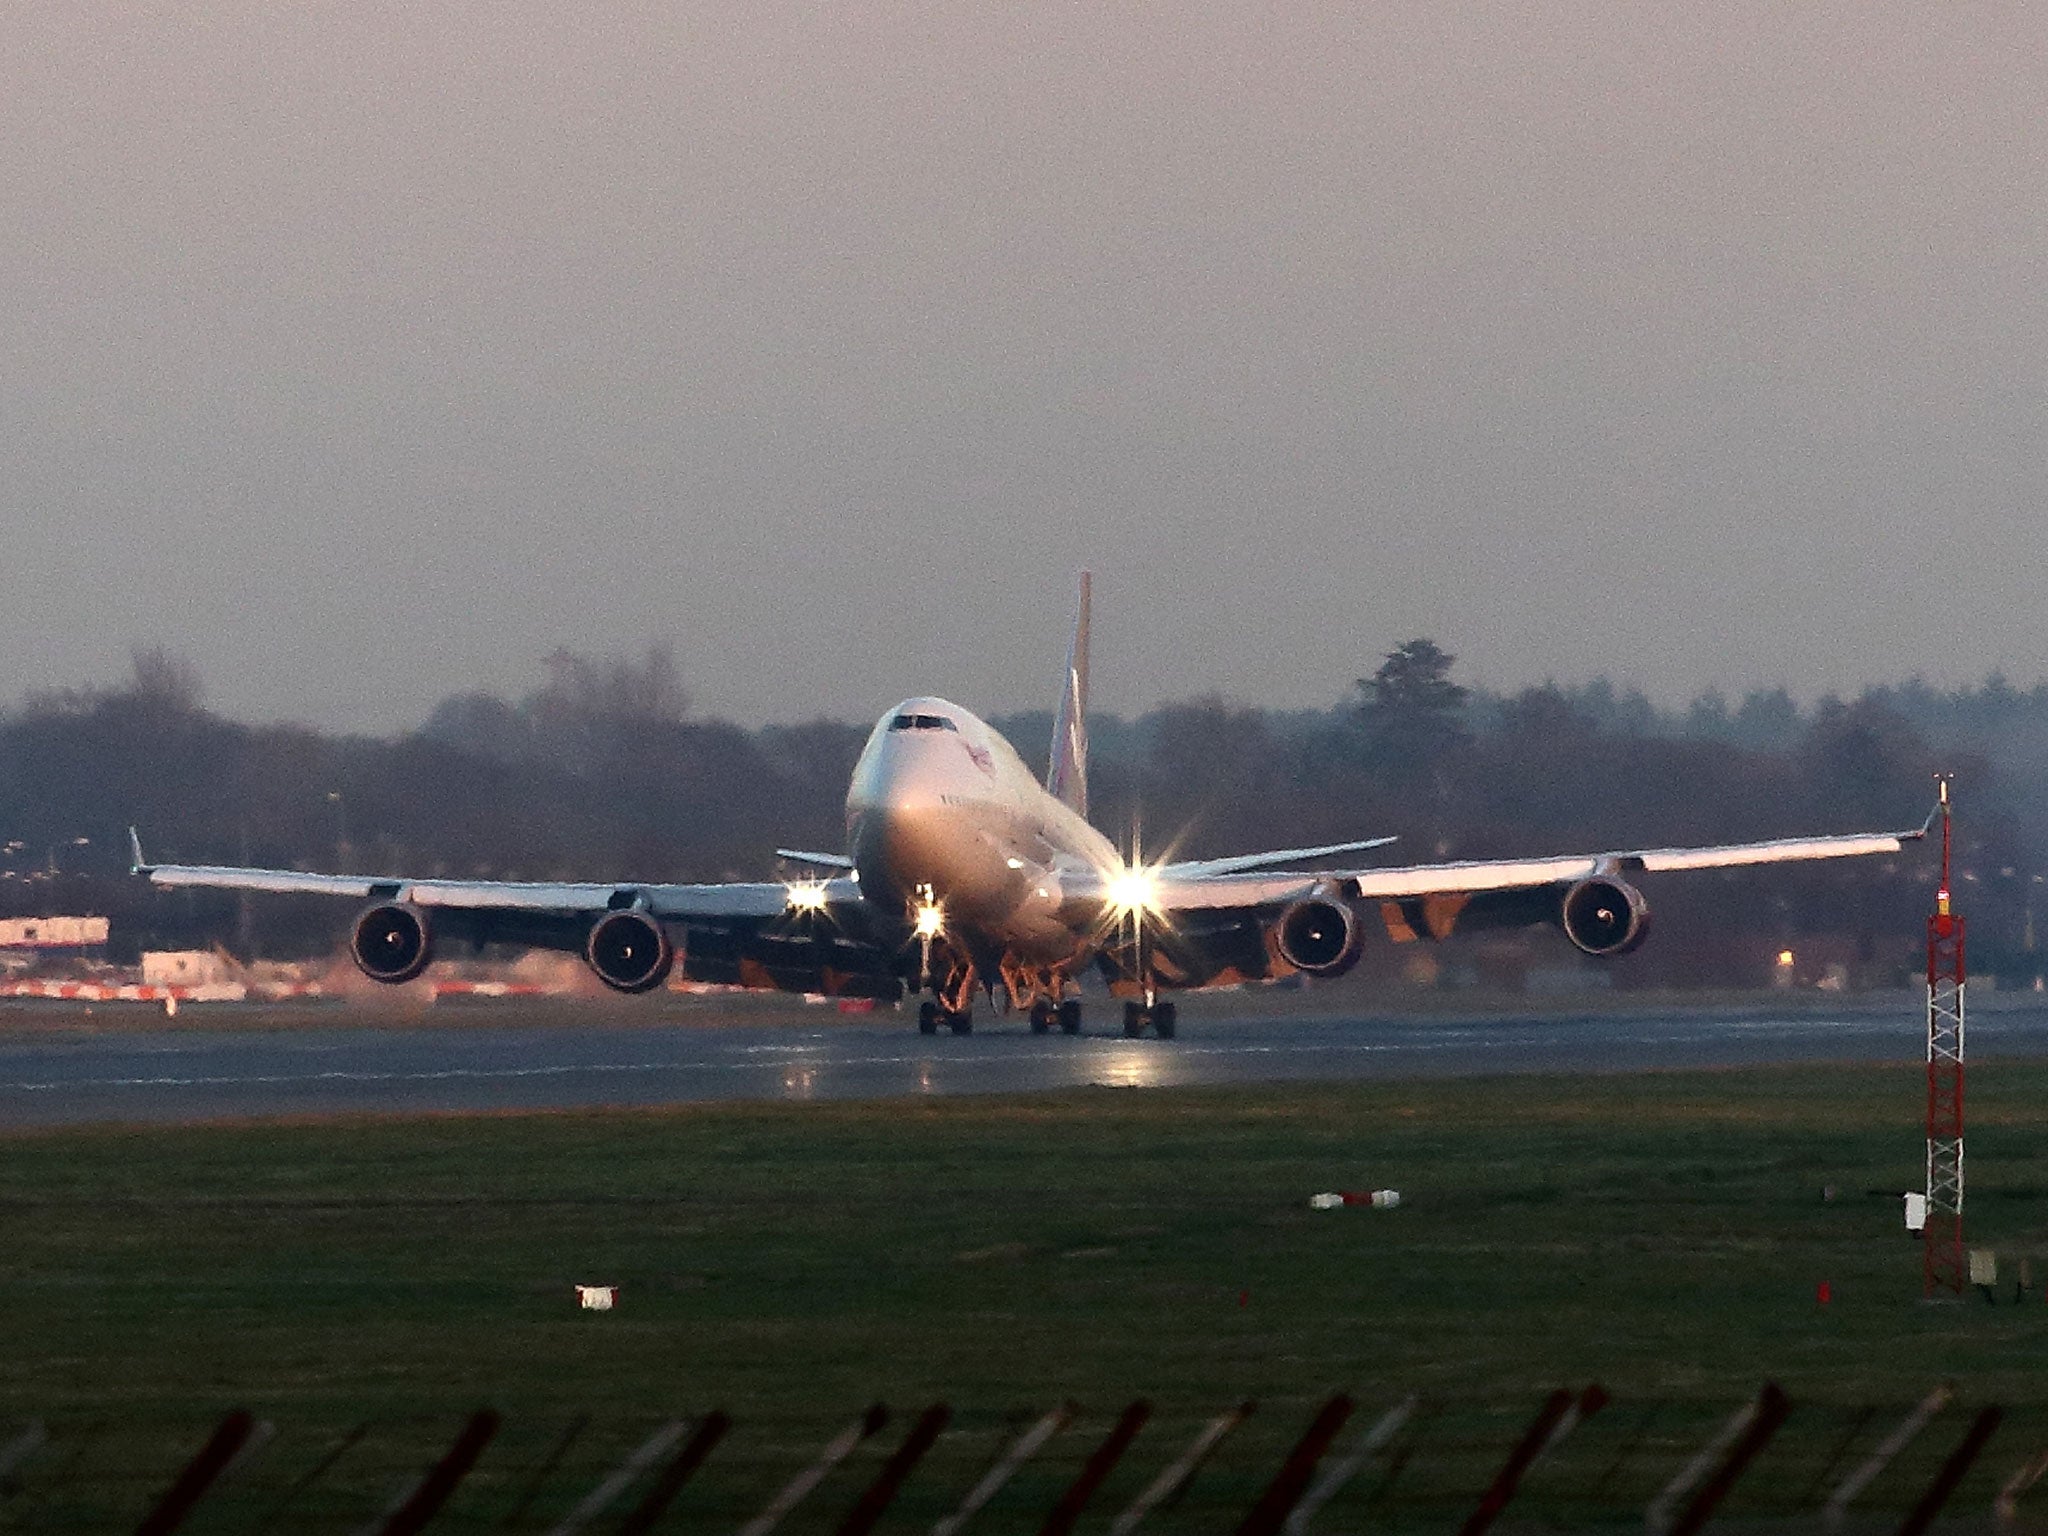 The 24-year-old man was arrested before boarding a flight at Gatwick